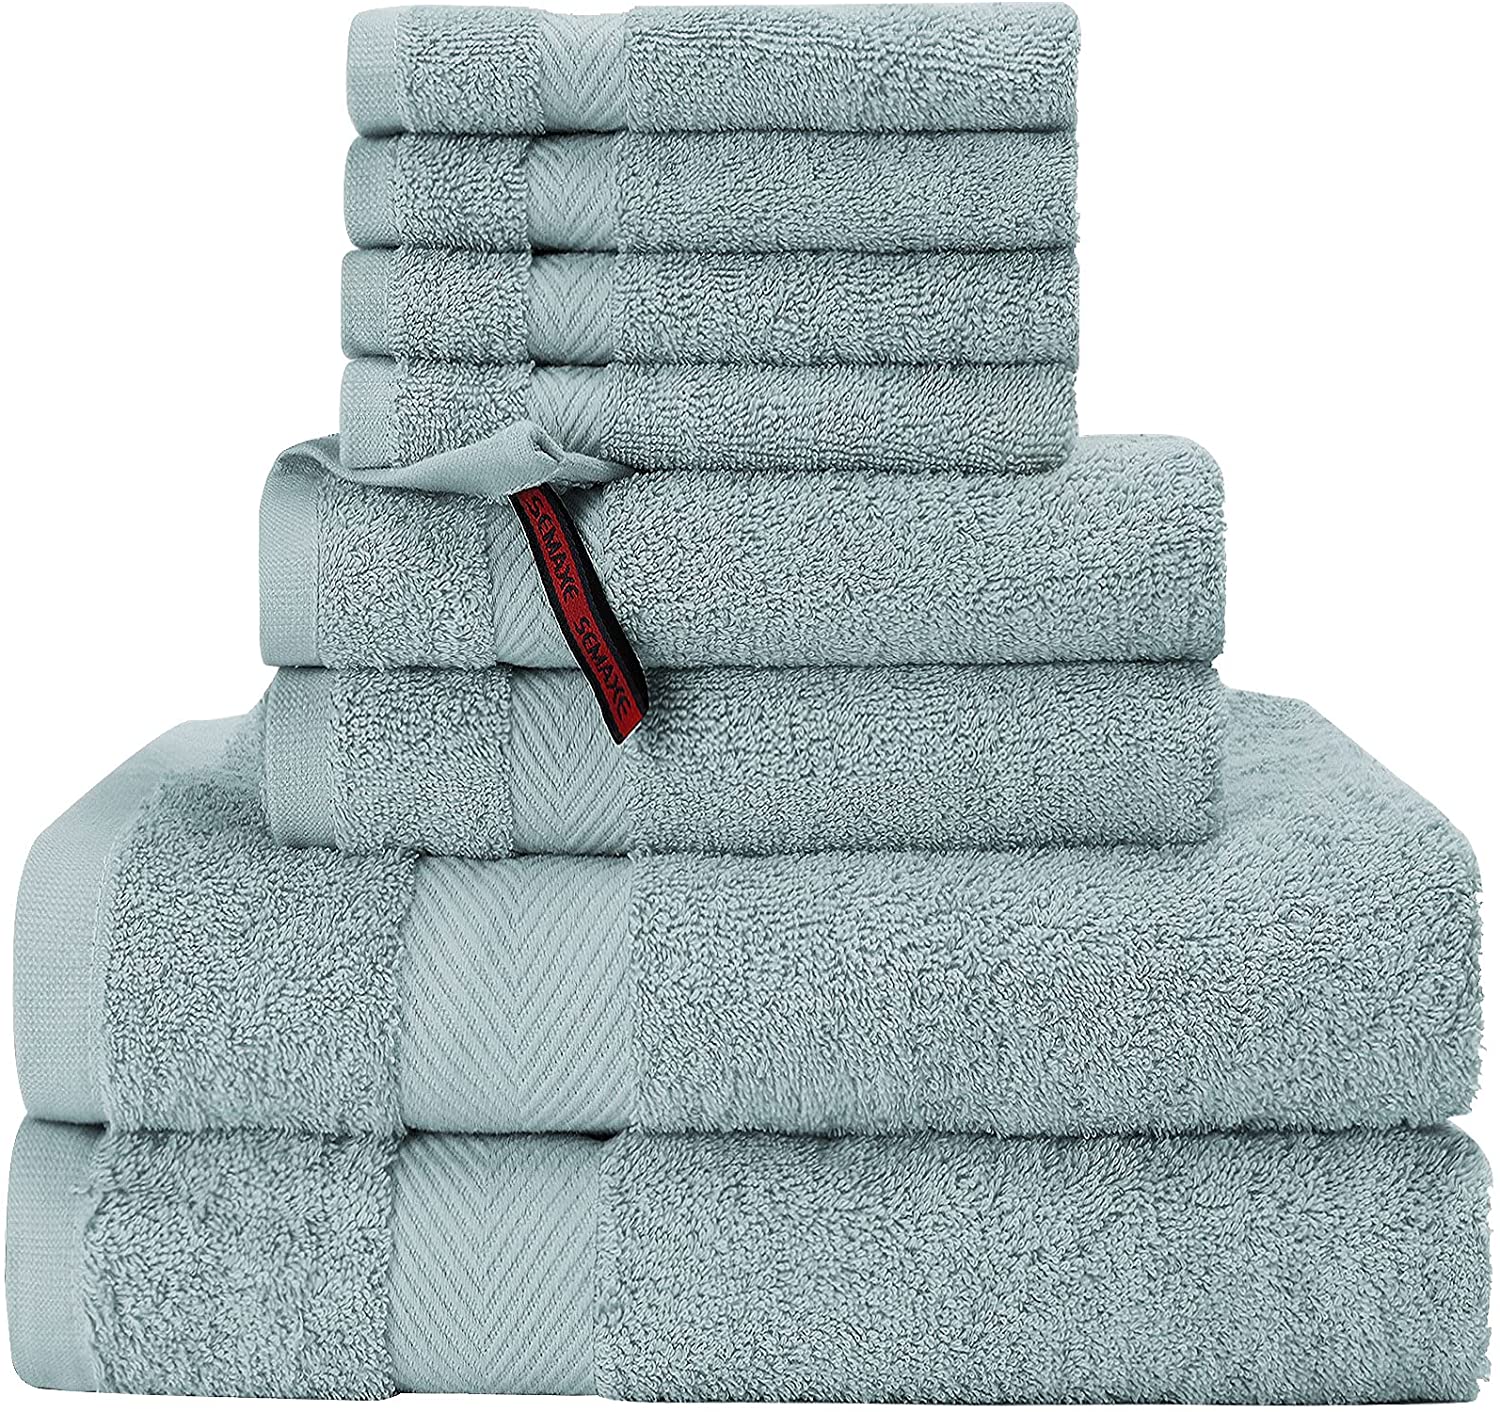 Solid Color Cotton Towels Set, With 2 Bath Towels 2 Hand Towels 4